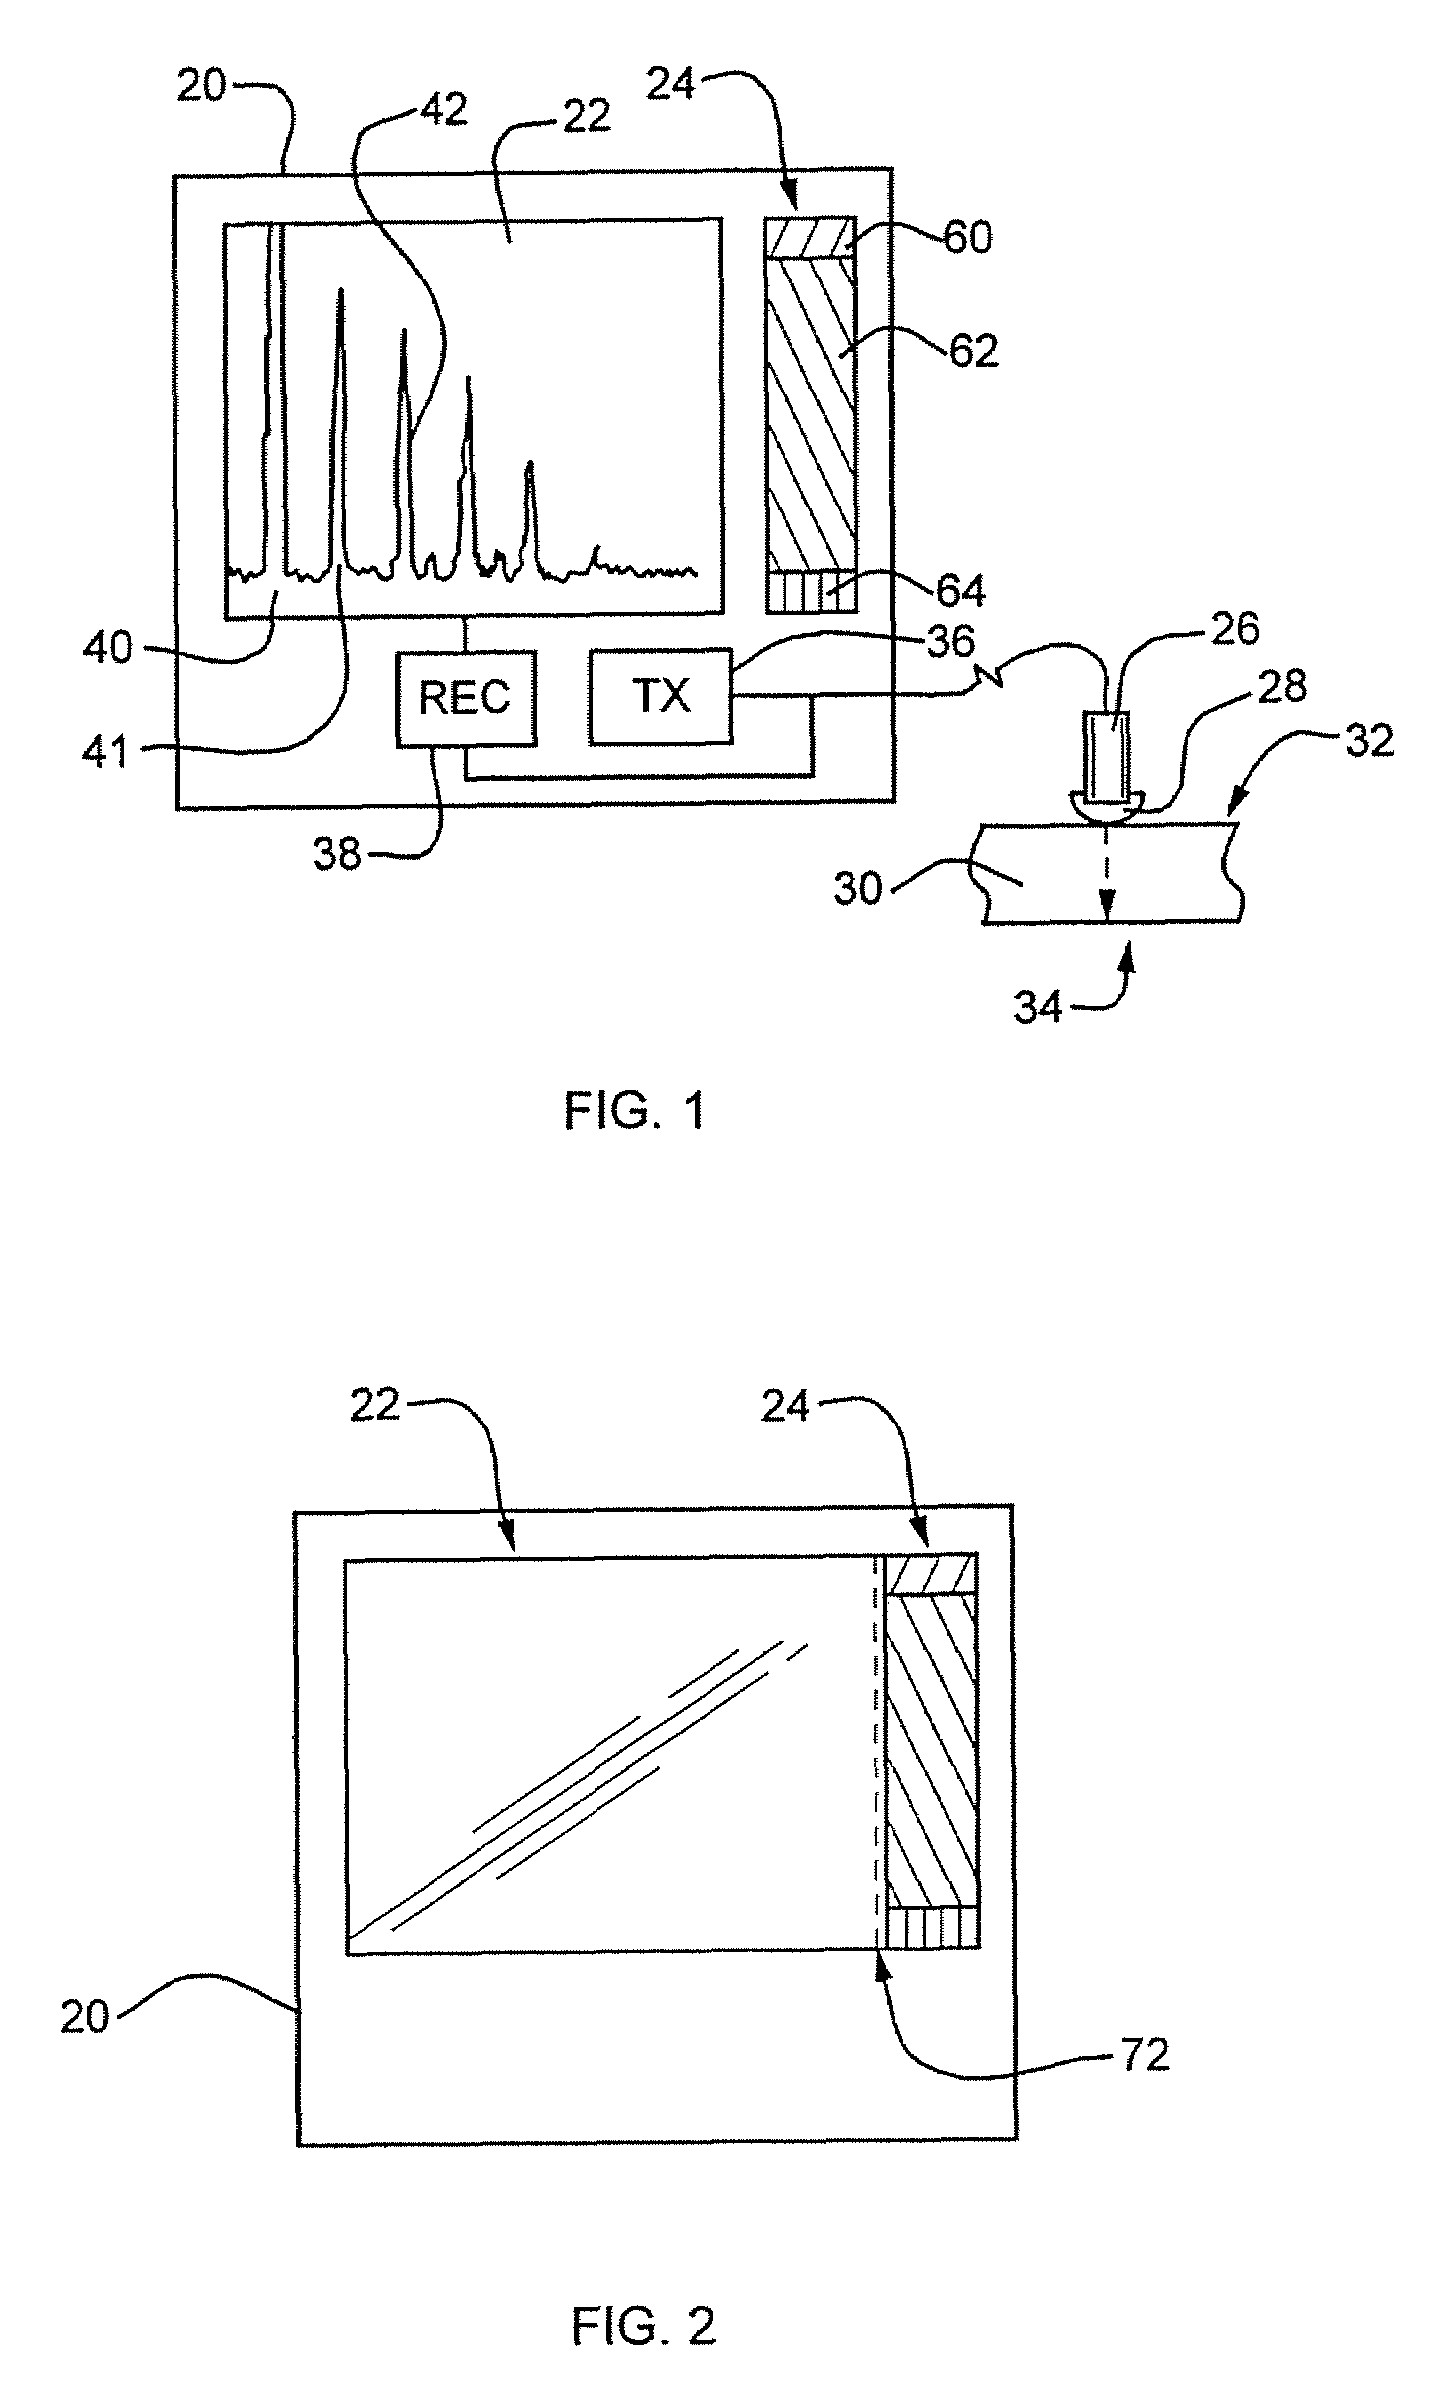 Ultrasonic inspection apparatus for inspecting a workpiece